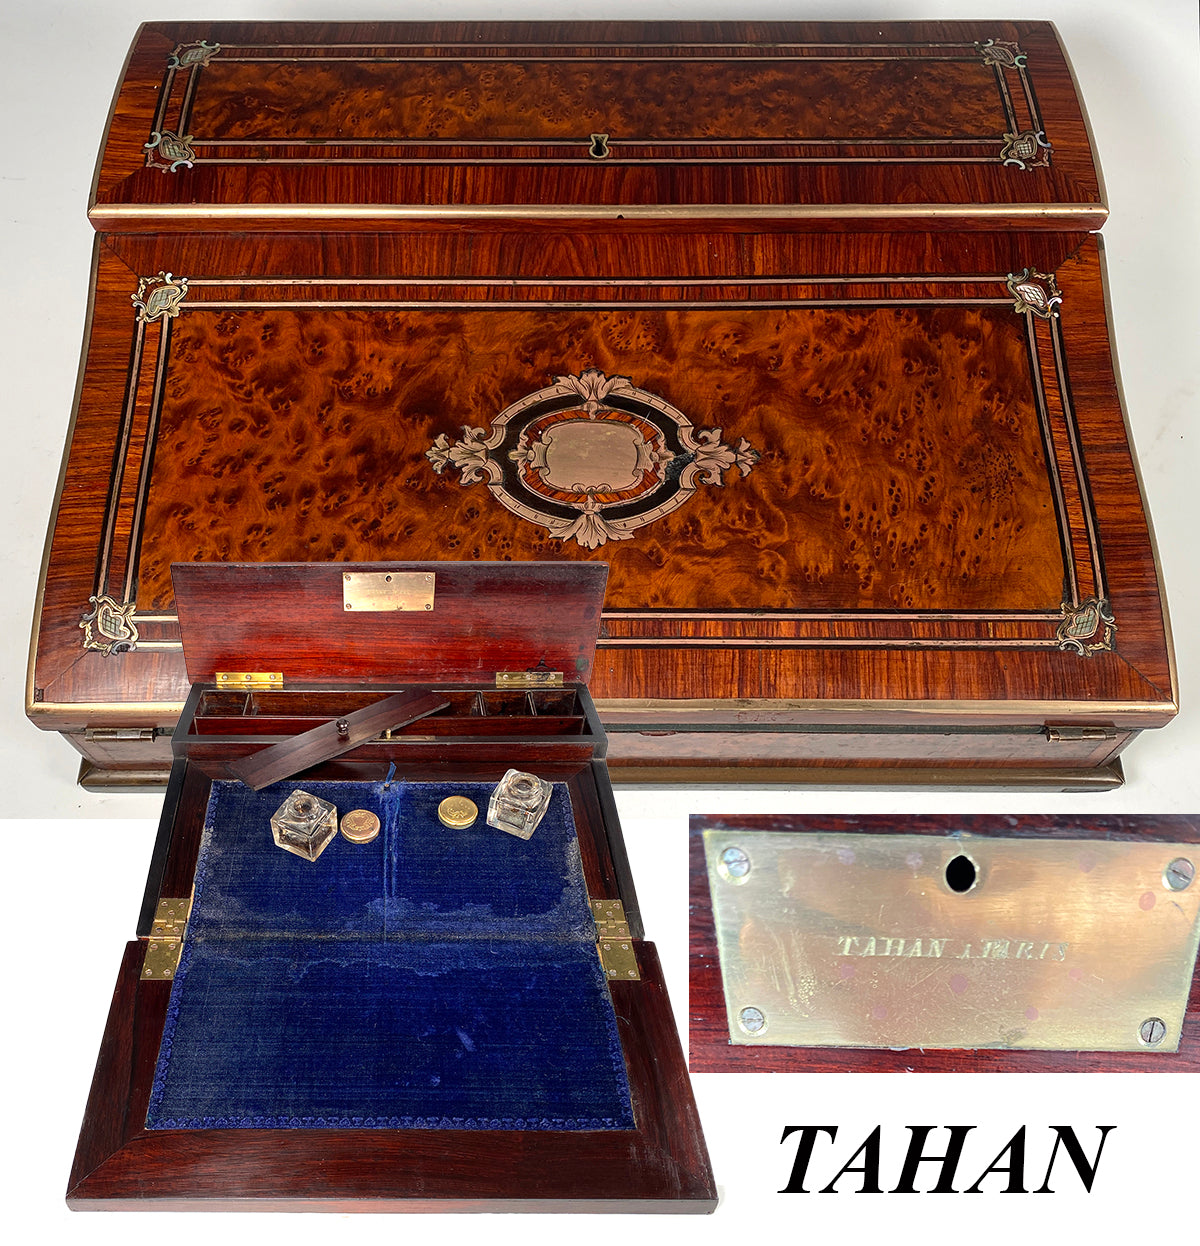 Rare Antique French 13.5" Cabinet Writer's Slope, Chest, Inkwell TAHAN Signature Plate